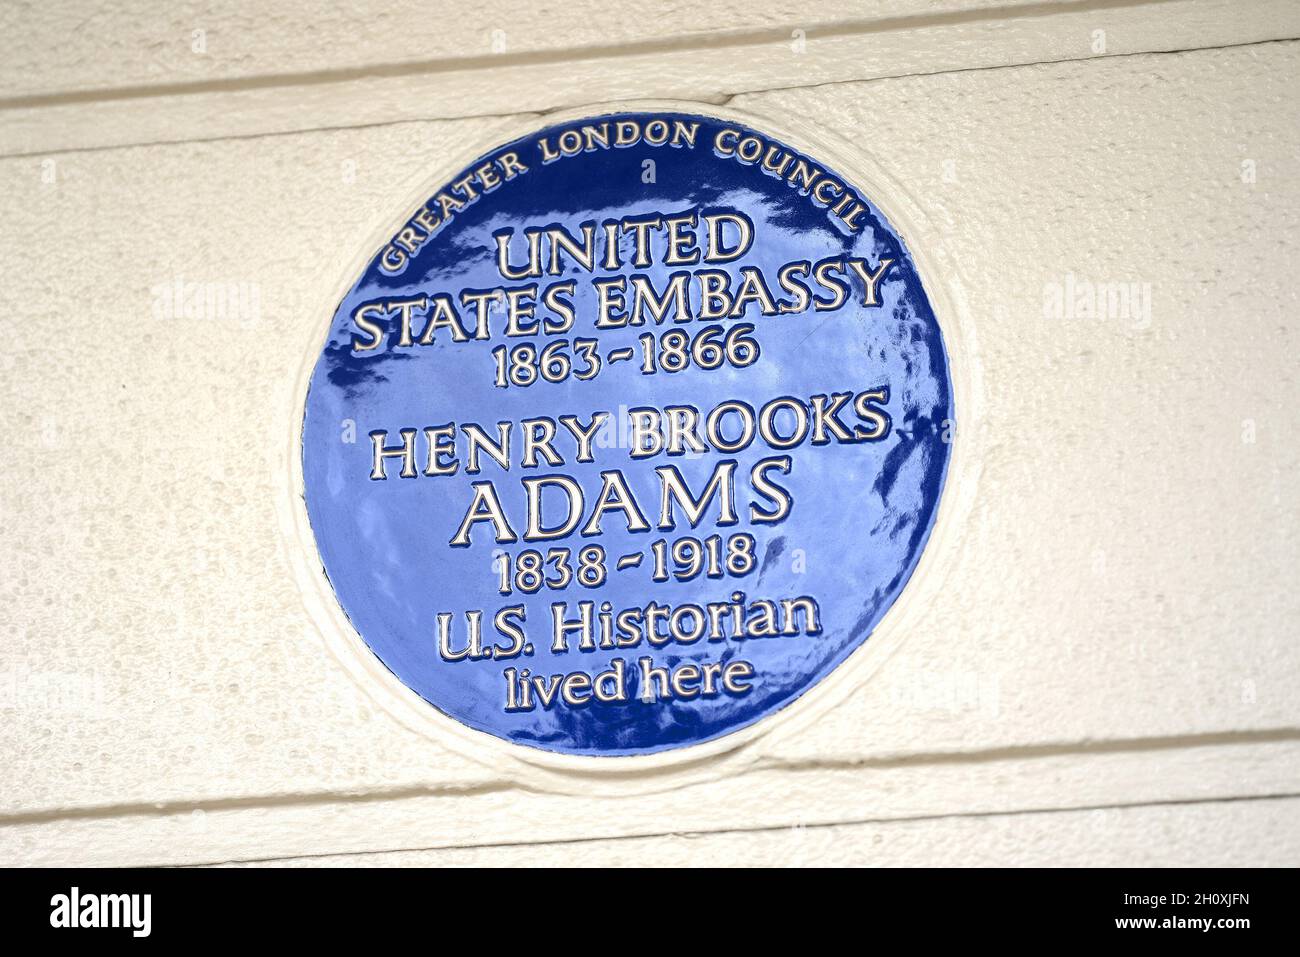 London, UK. Commemorative plaque: 'United States Embassy 1863-1866. Henry Brooks Adams 1838-1918 US historian lived here' at 98 Portland Place, Westmi Stock Photo